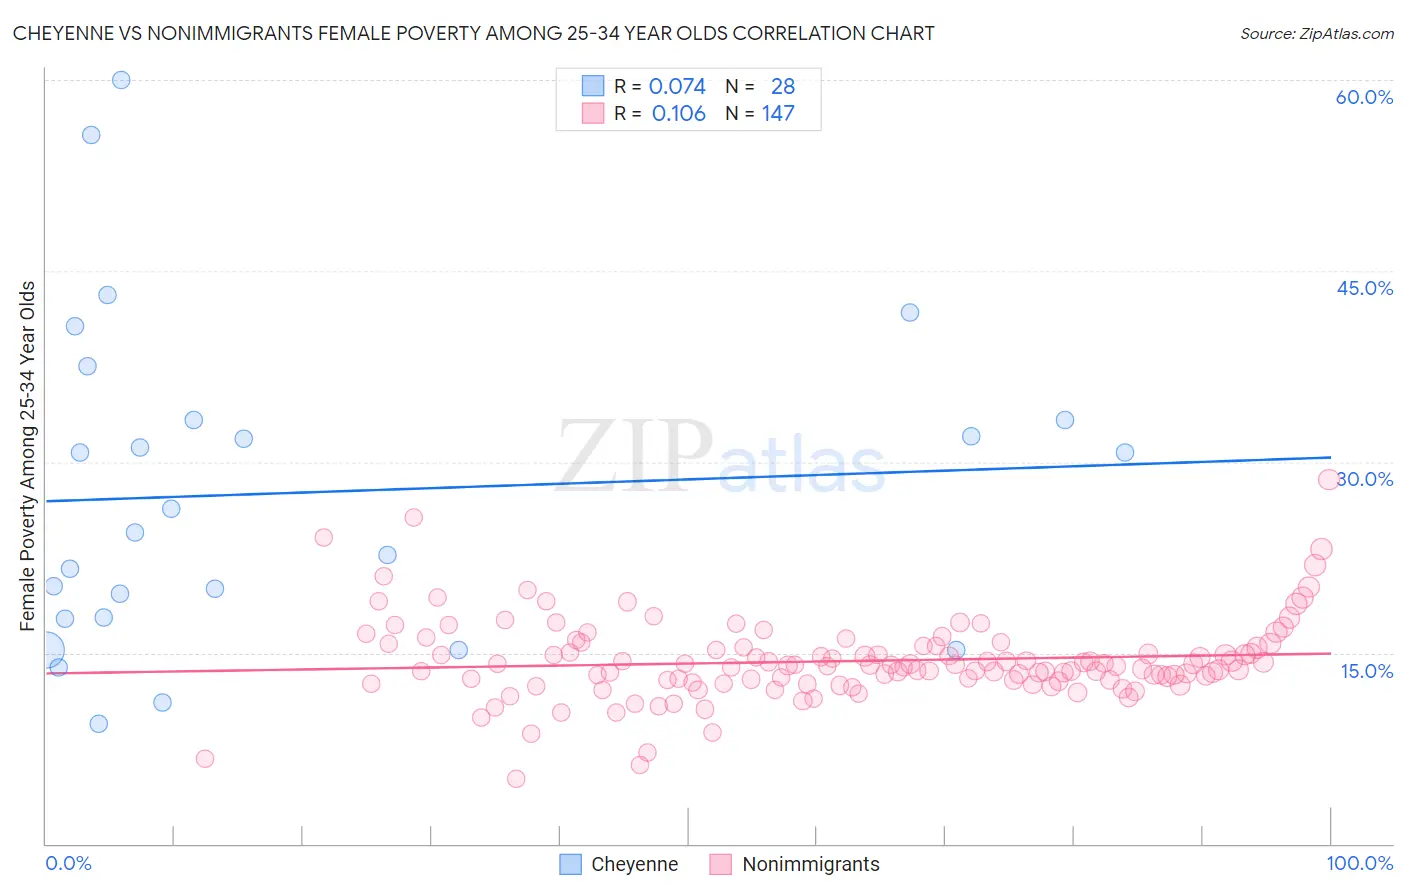 Cheyenne vs Nonimmigrants Female Poverty Among 25-34 Year Olds